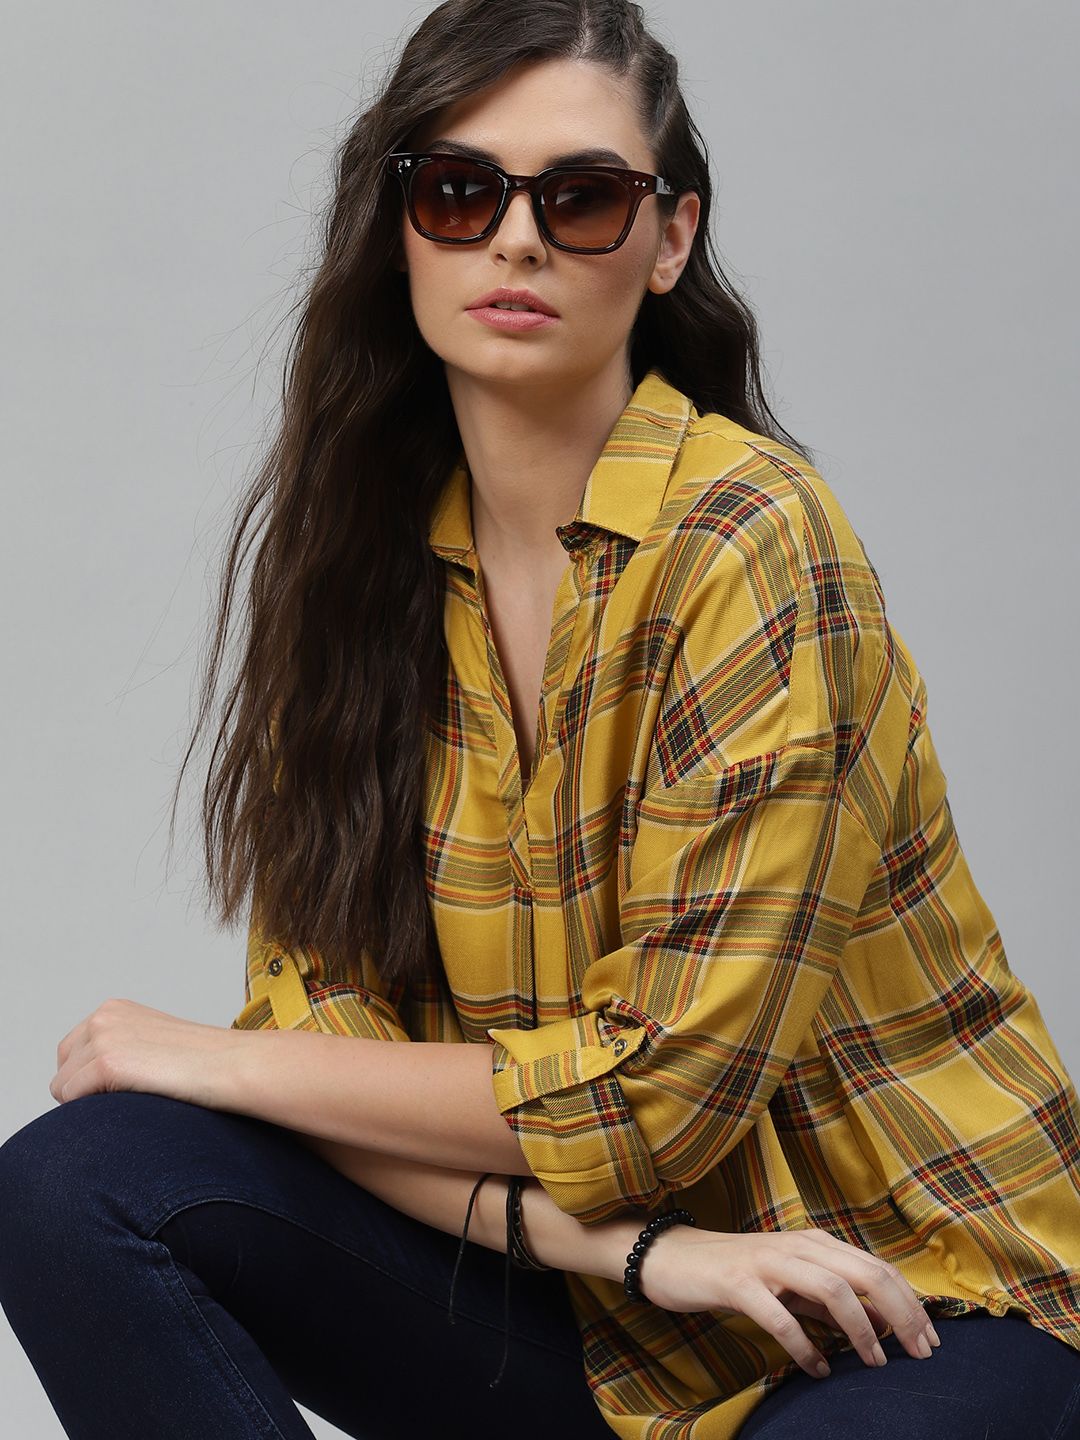 The Roadster Lifestyle Co Women Ecovero Mustard Yellow  Black Boxy Checked High-Low Shirt Style Top Price in India